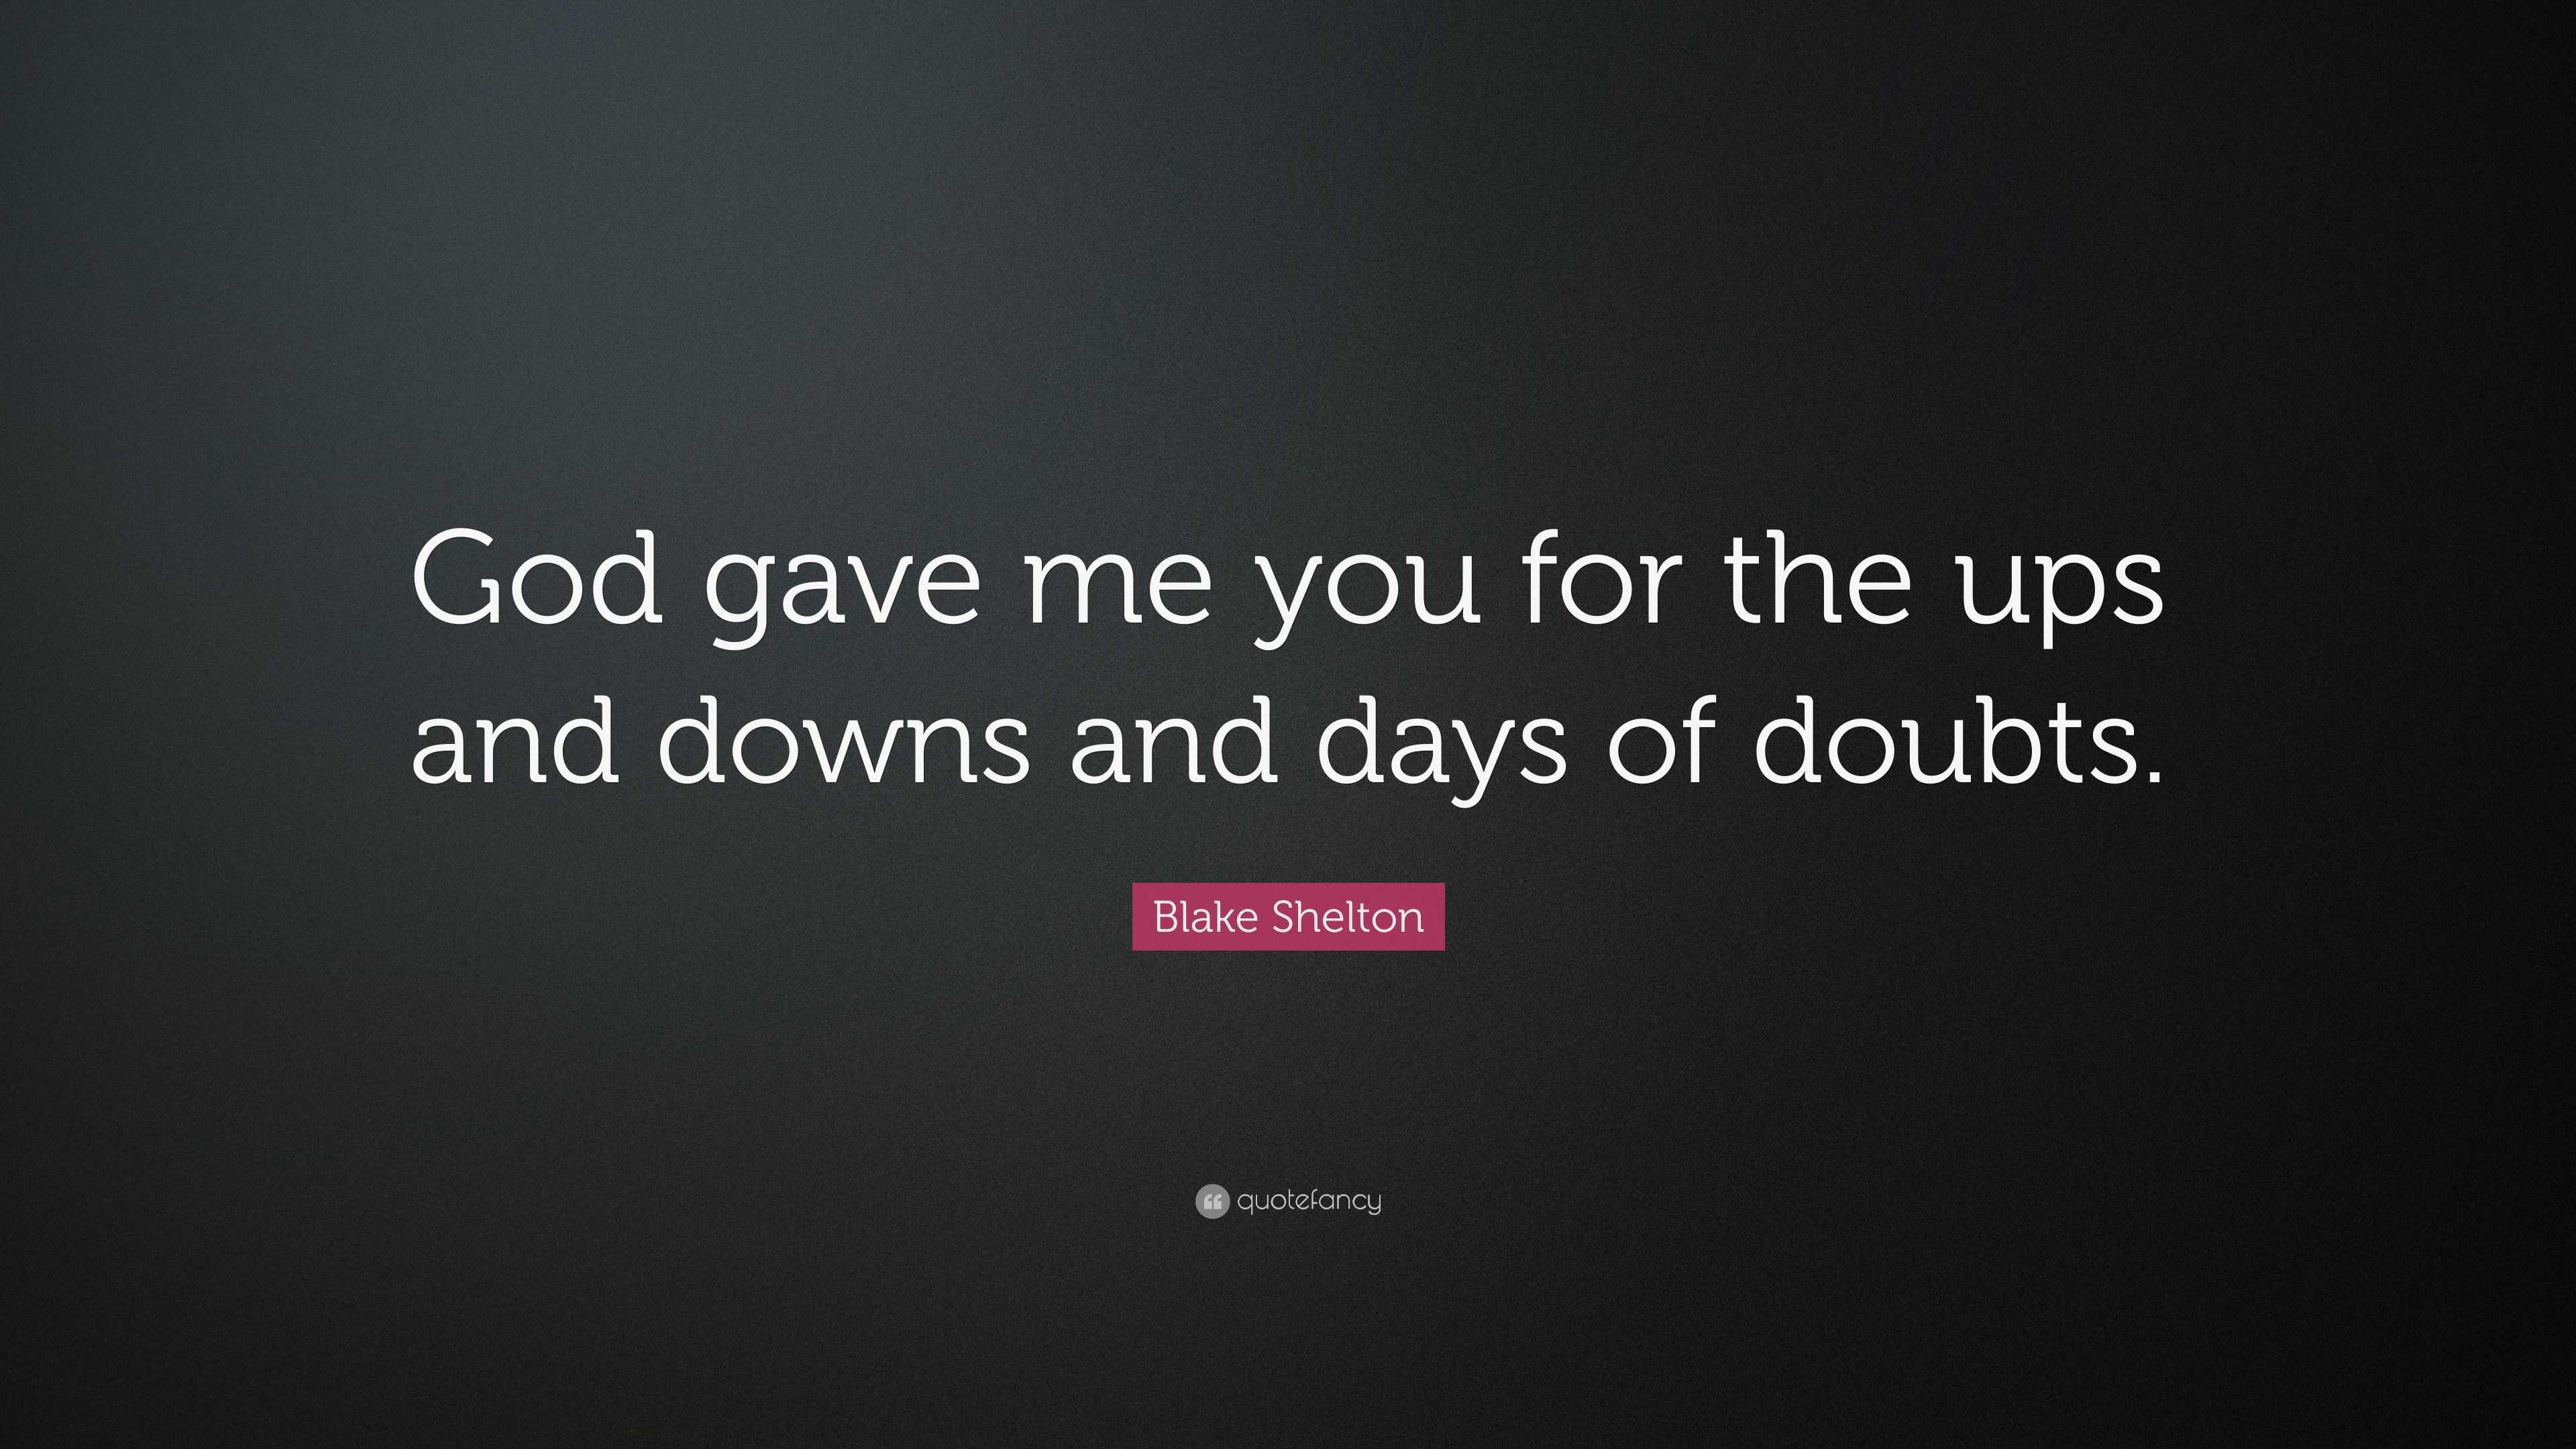 Blake Shelton Quote: “God gave me you for the ups and downs and days of ...